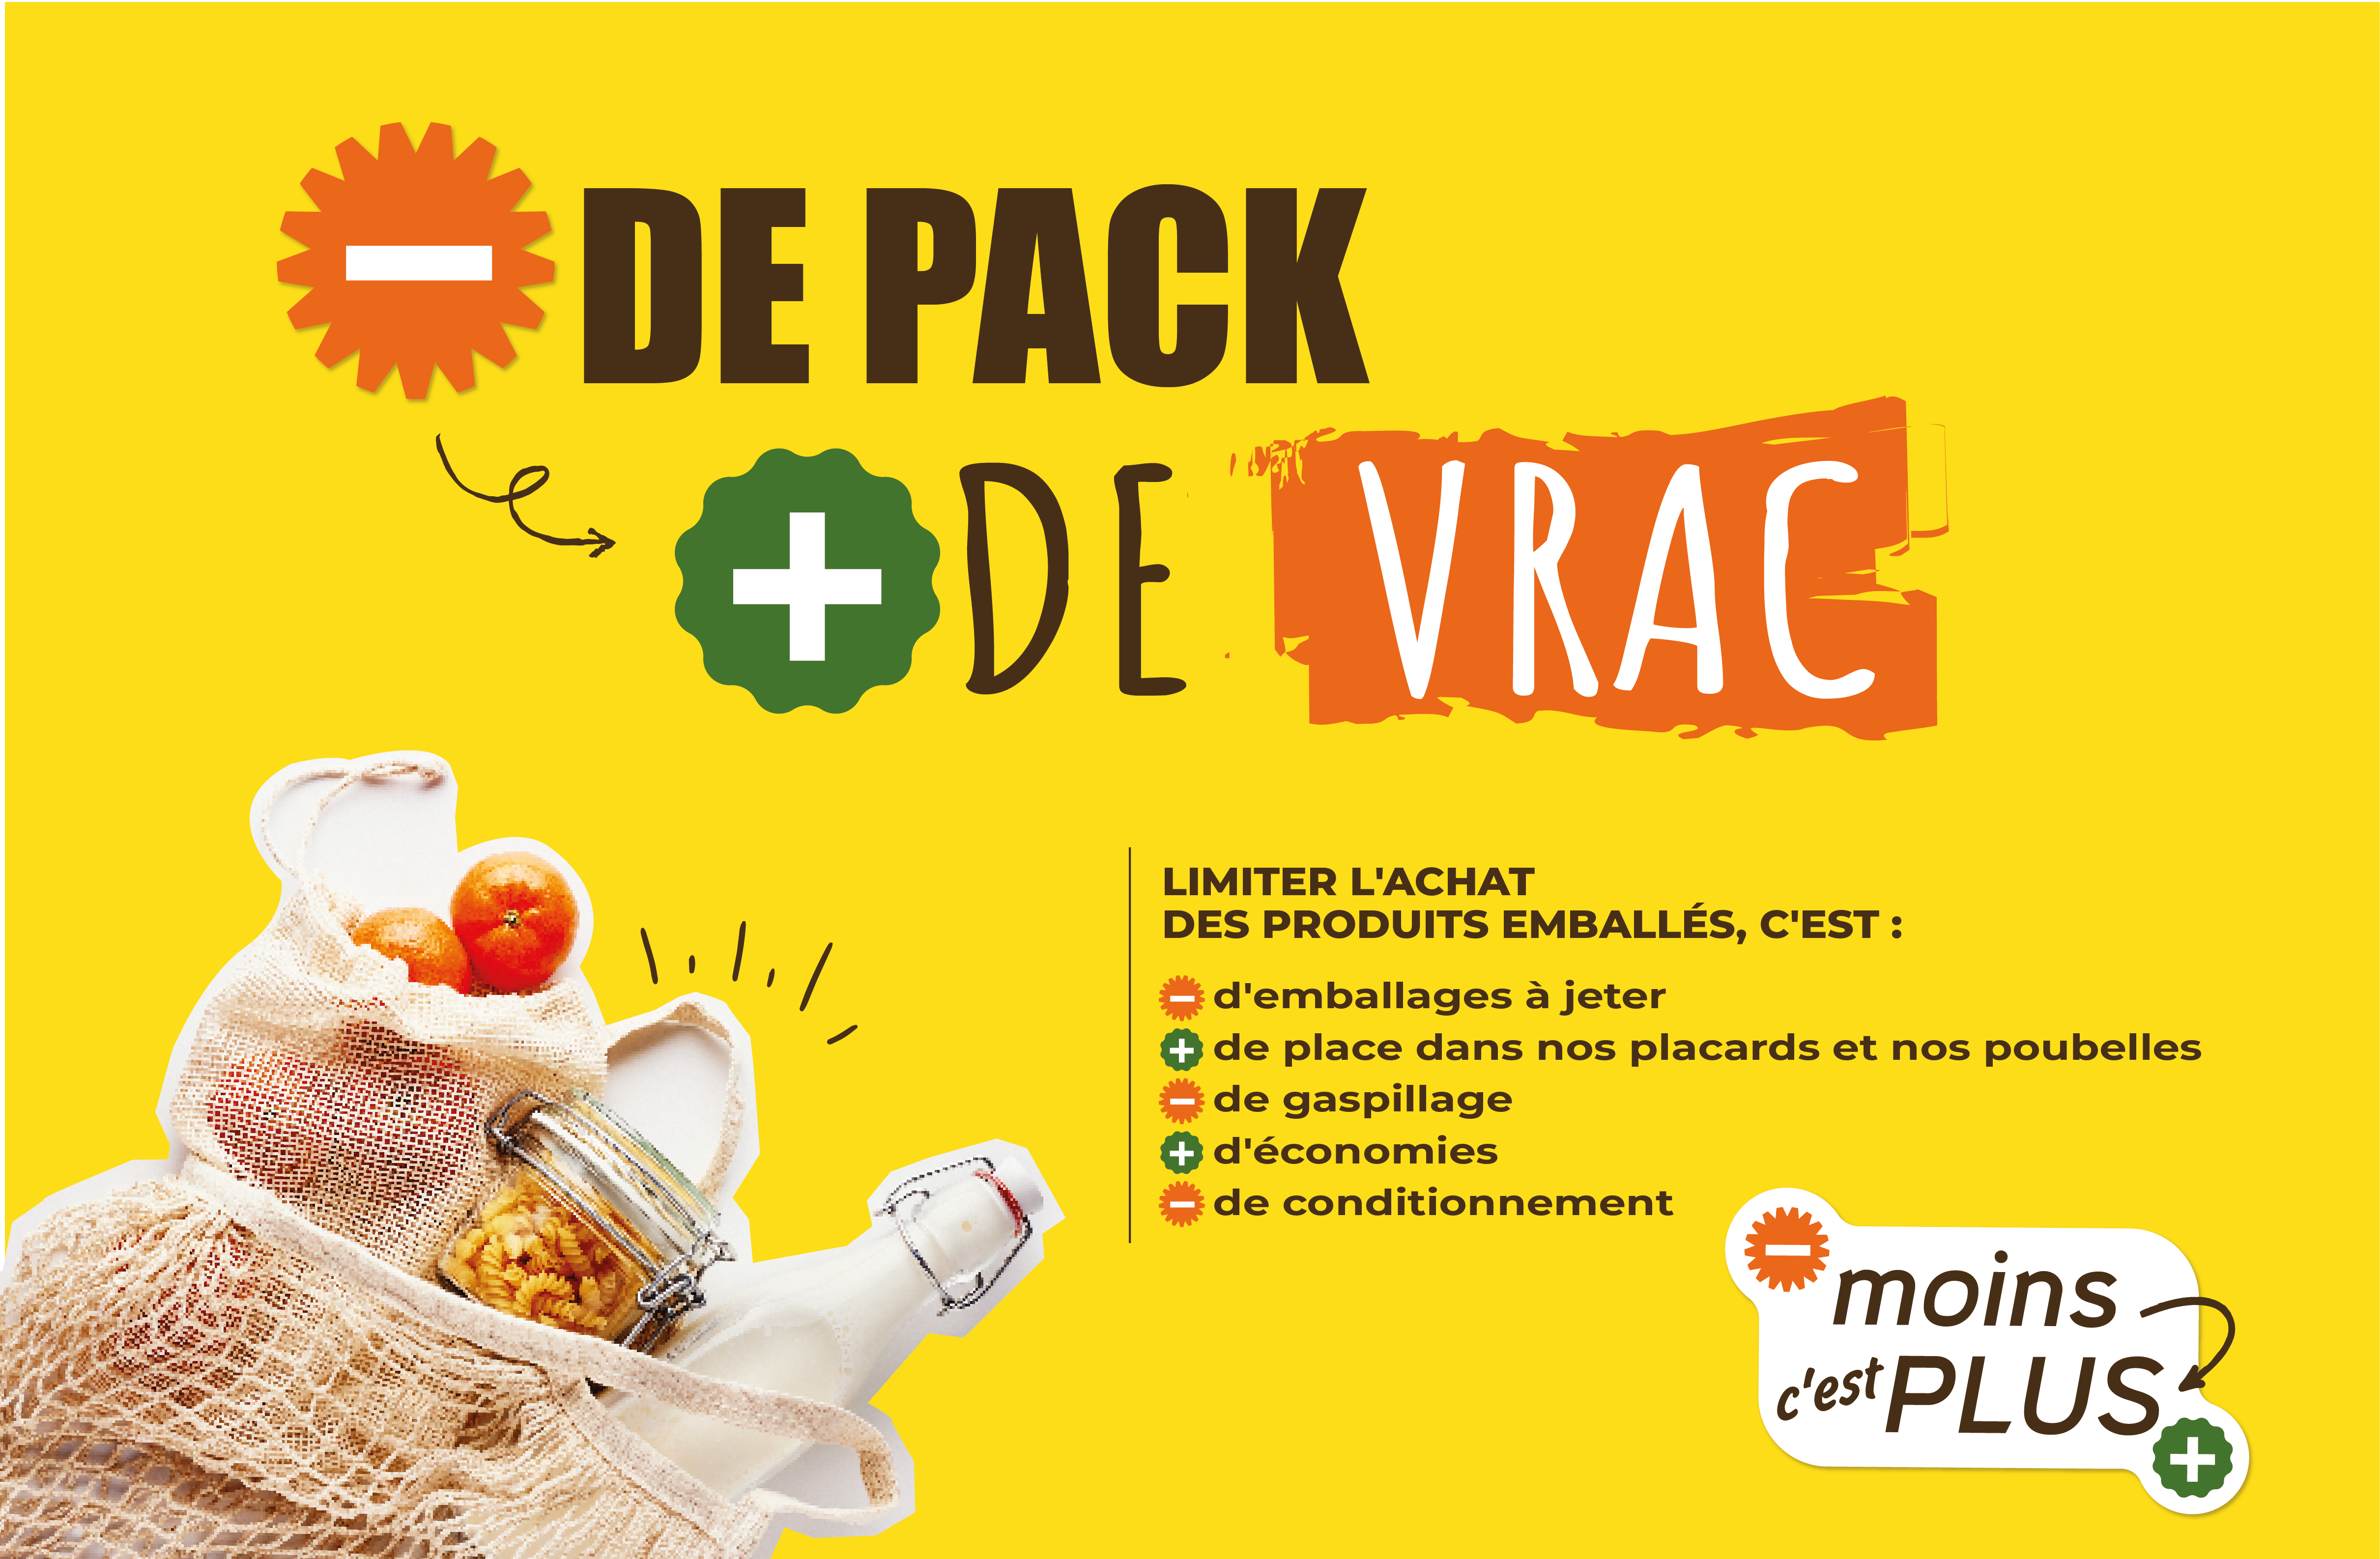 https://www.laval.fr/fileadmin/Phototheque_agglo/Dechets_-_doc___imgs/Campagne_d%C3%A9chets_2023/1._Jaune_-_Pack_visuel_site.png